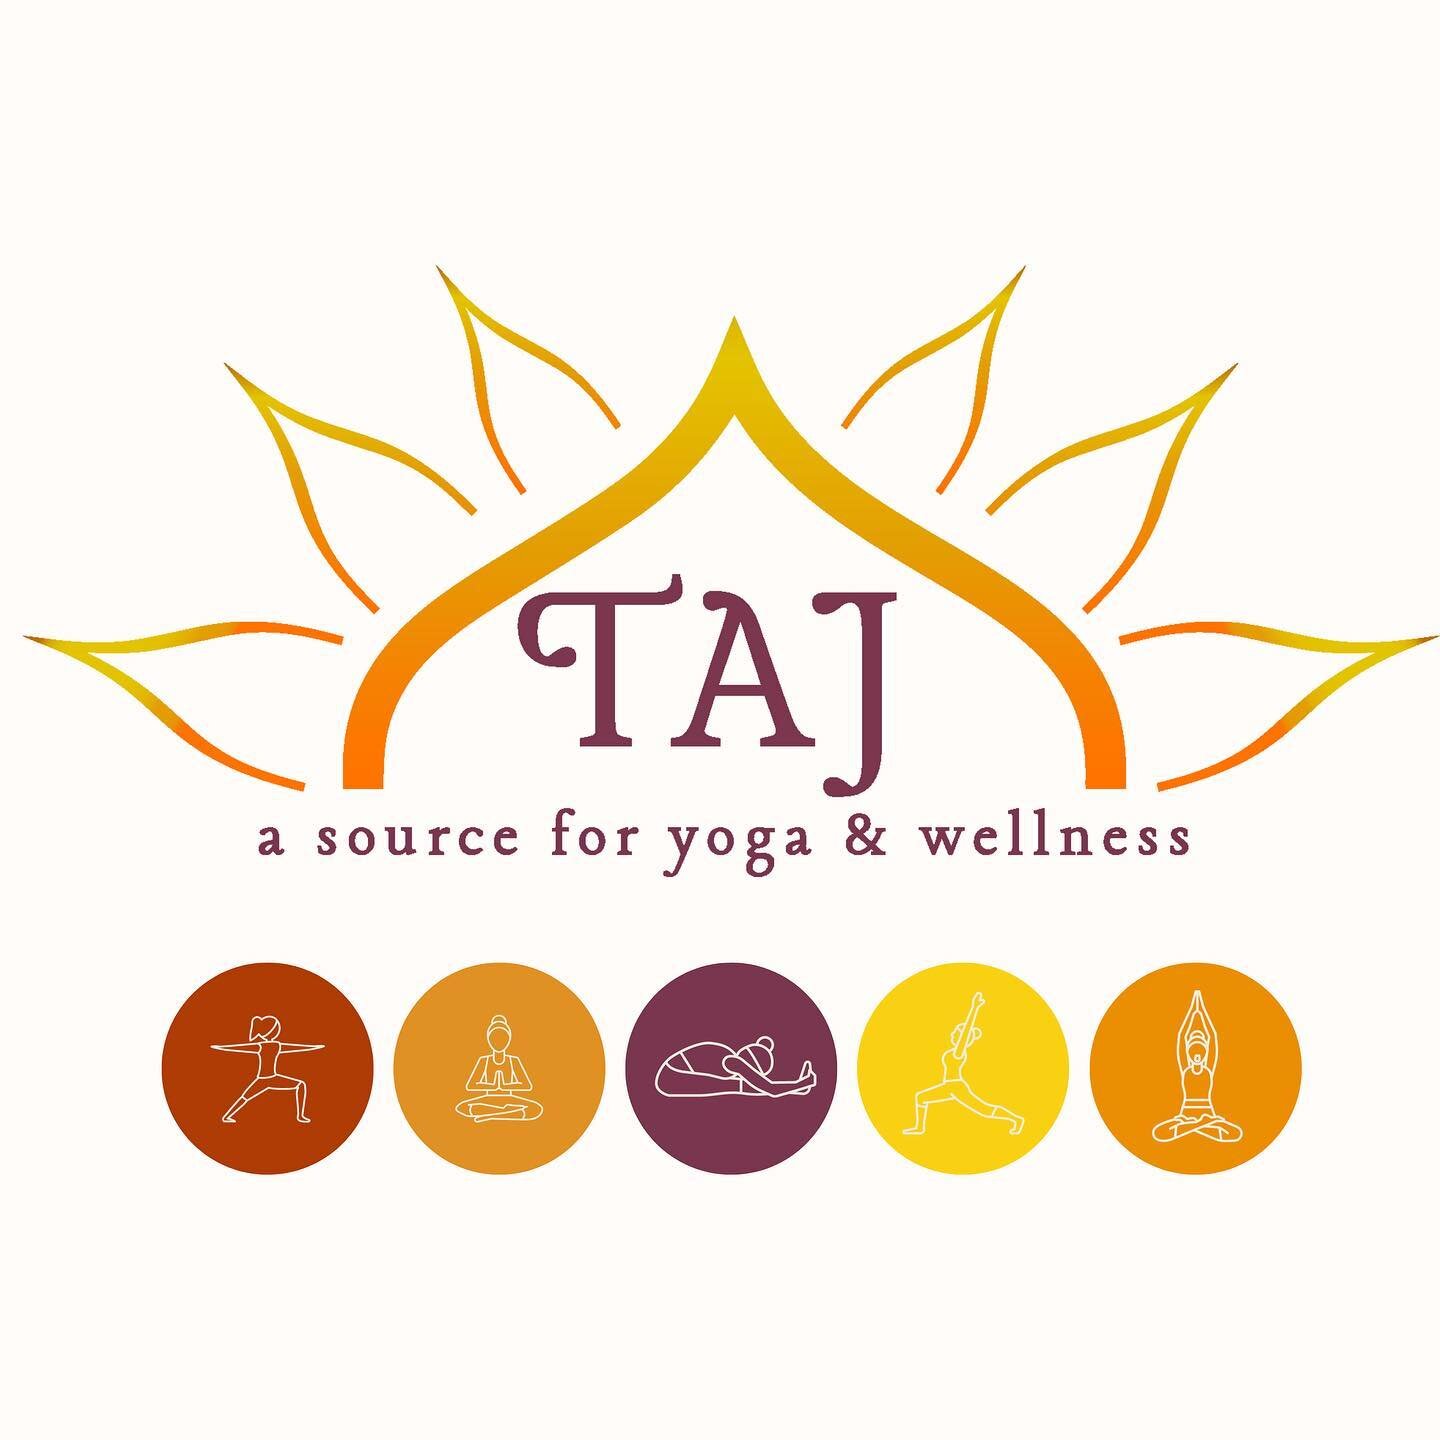 Branding for TAJ- a source for yoga and wellness. Coming soon to the Richmond Community!